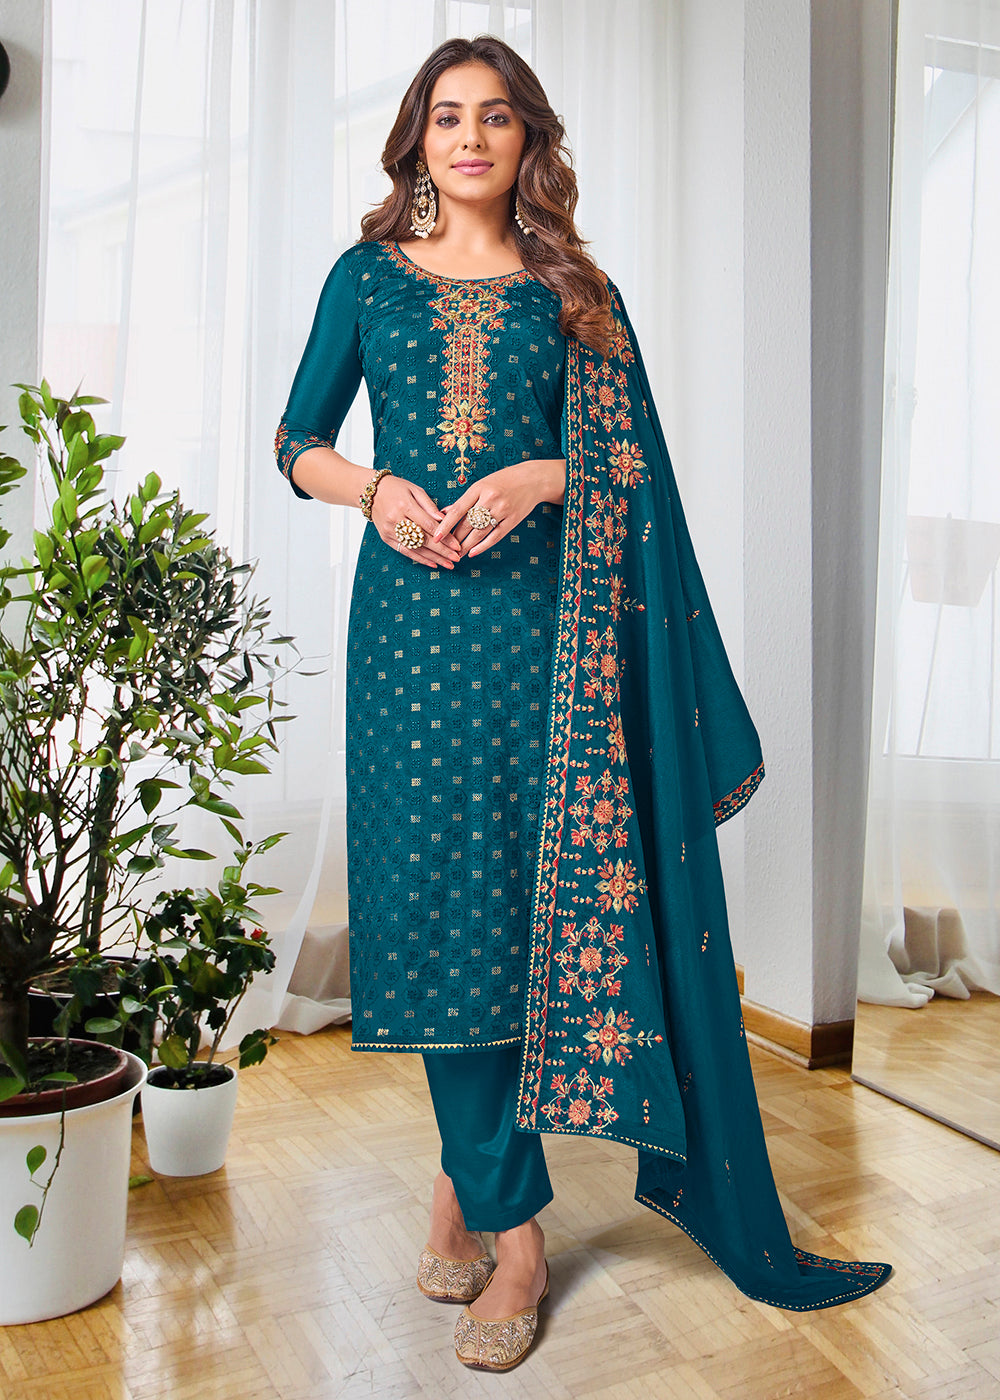 Buy Now Pretty Prussian Blue Beautifully Embroidered Trendy Salwar Kameez Online in USA, UK, Canada, Germany, Australia & Worldwide at Empress Clothing.